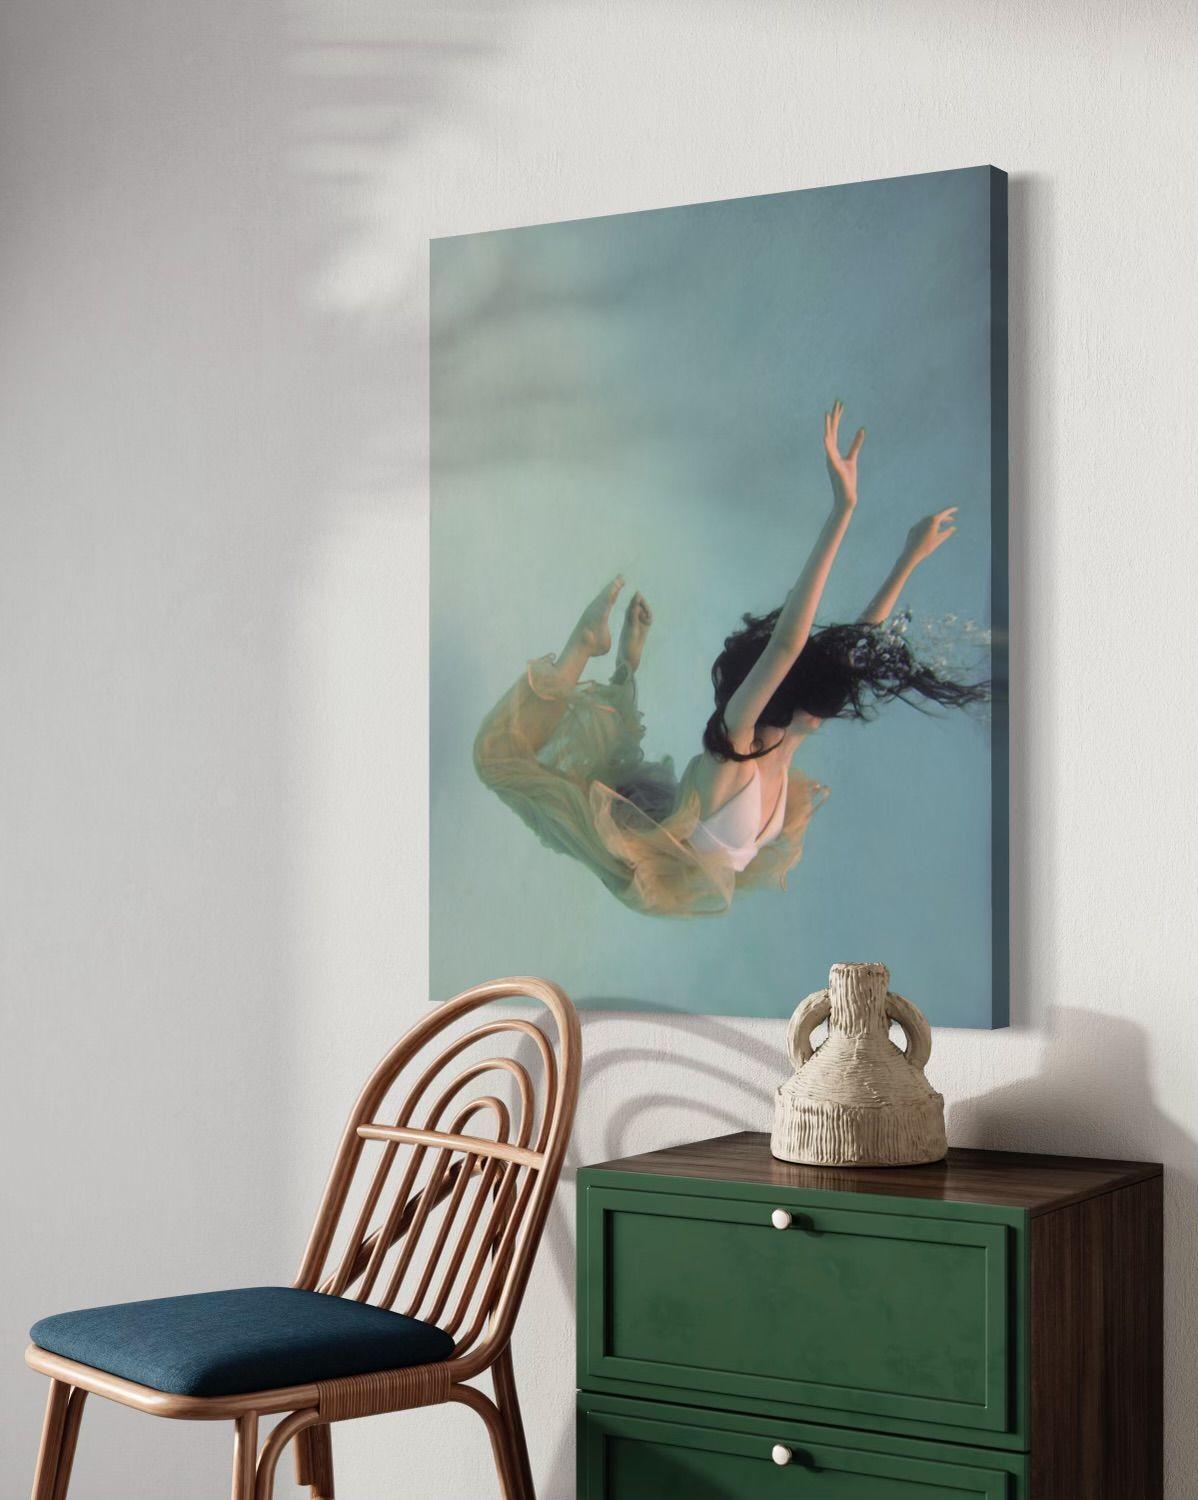 This contemporary figural limited edition art photograph by Alyssa Fortin is reminiscent of the angels that were often depicted in the Rococo style during the Baroque period. Rococo art was seen as more feminine, playful and often depicted scenes of